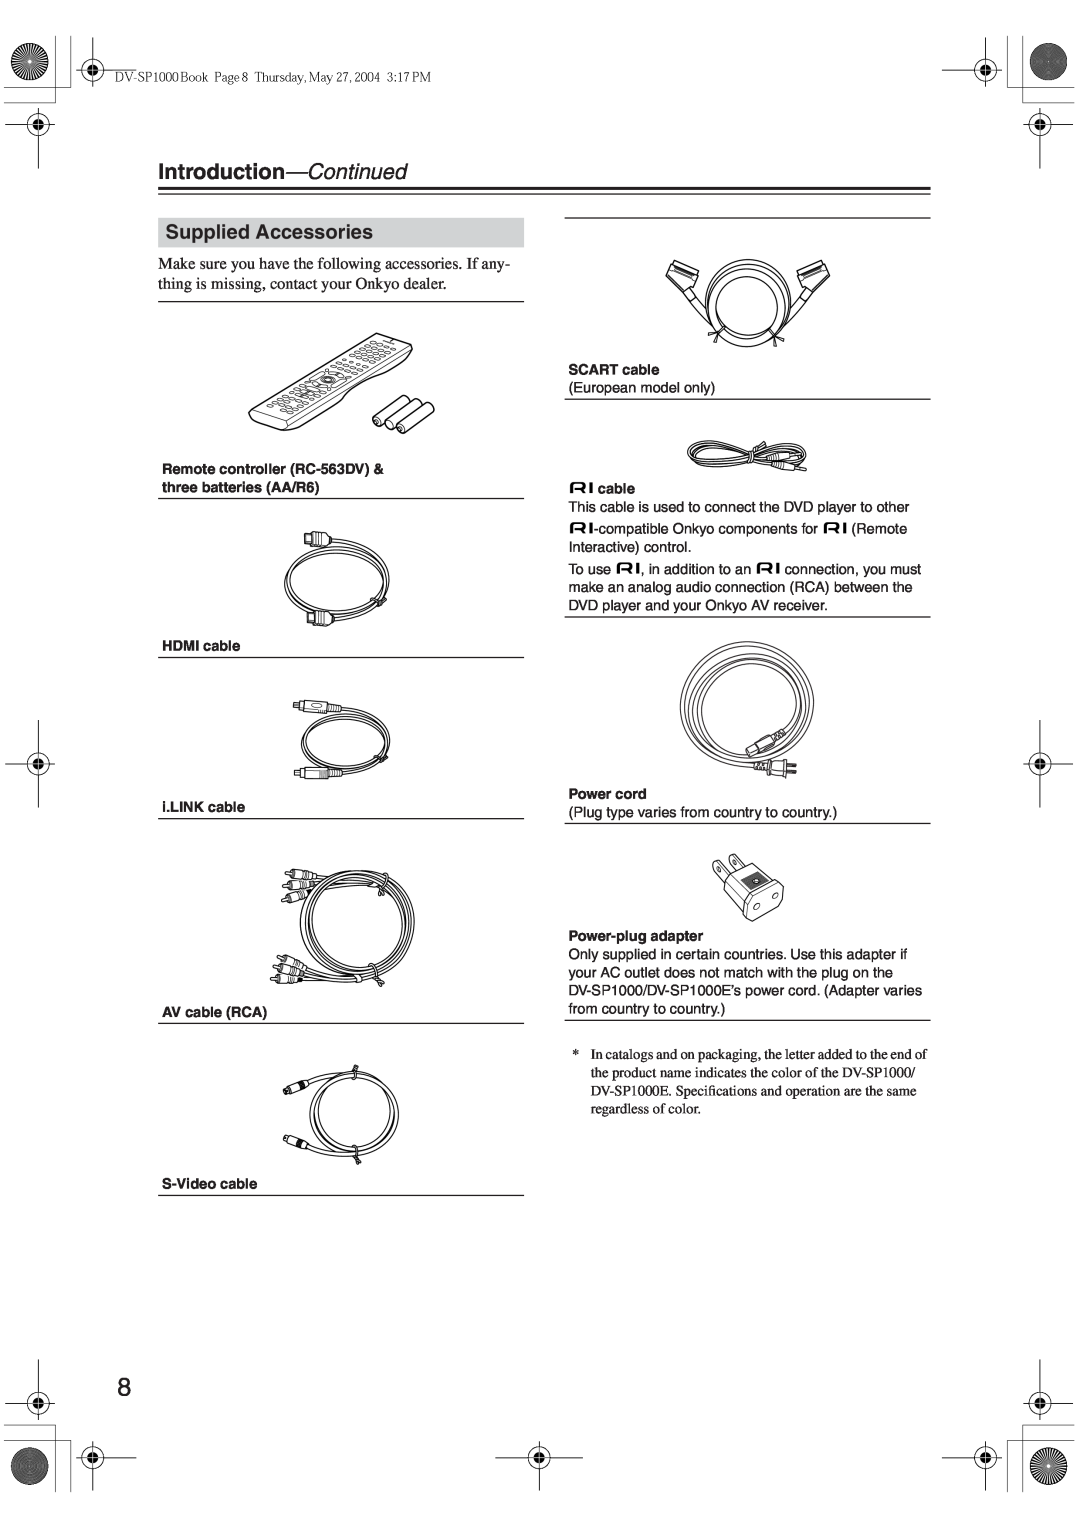 Onkyo DV-SP1000E instruction manual Introduction—Continued, Supplied Accessories 